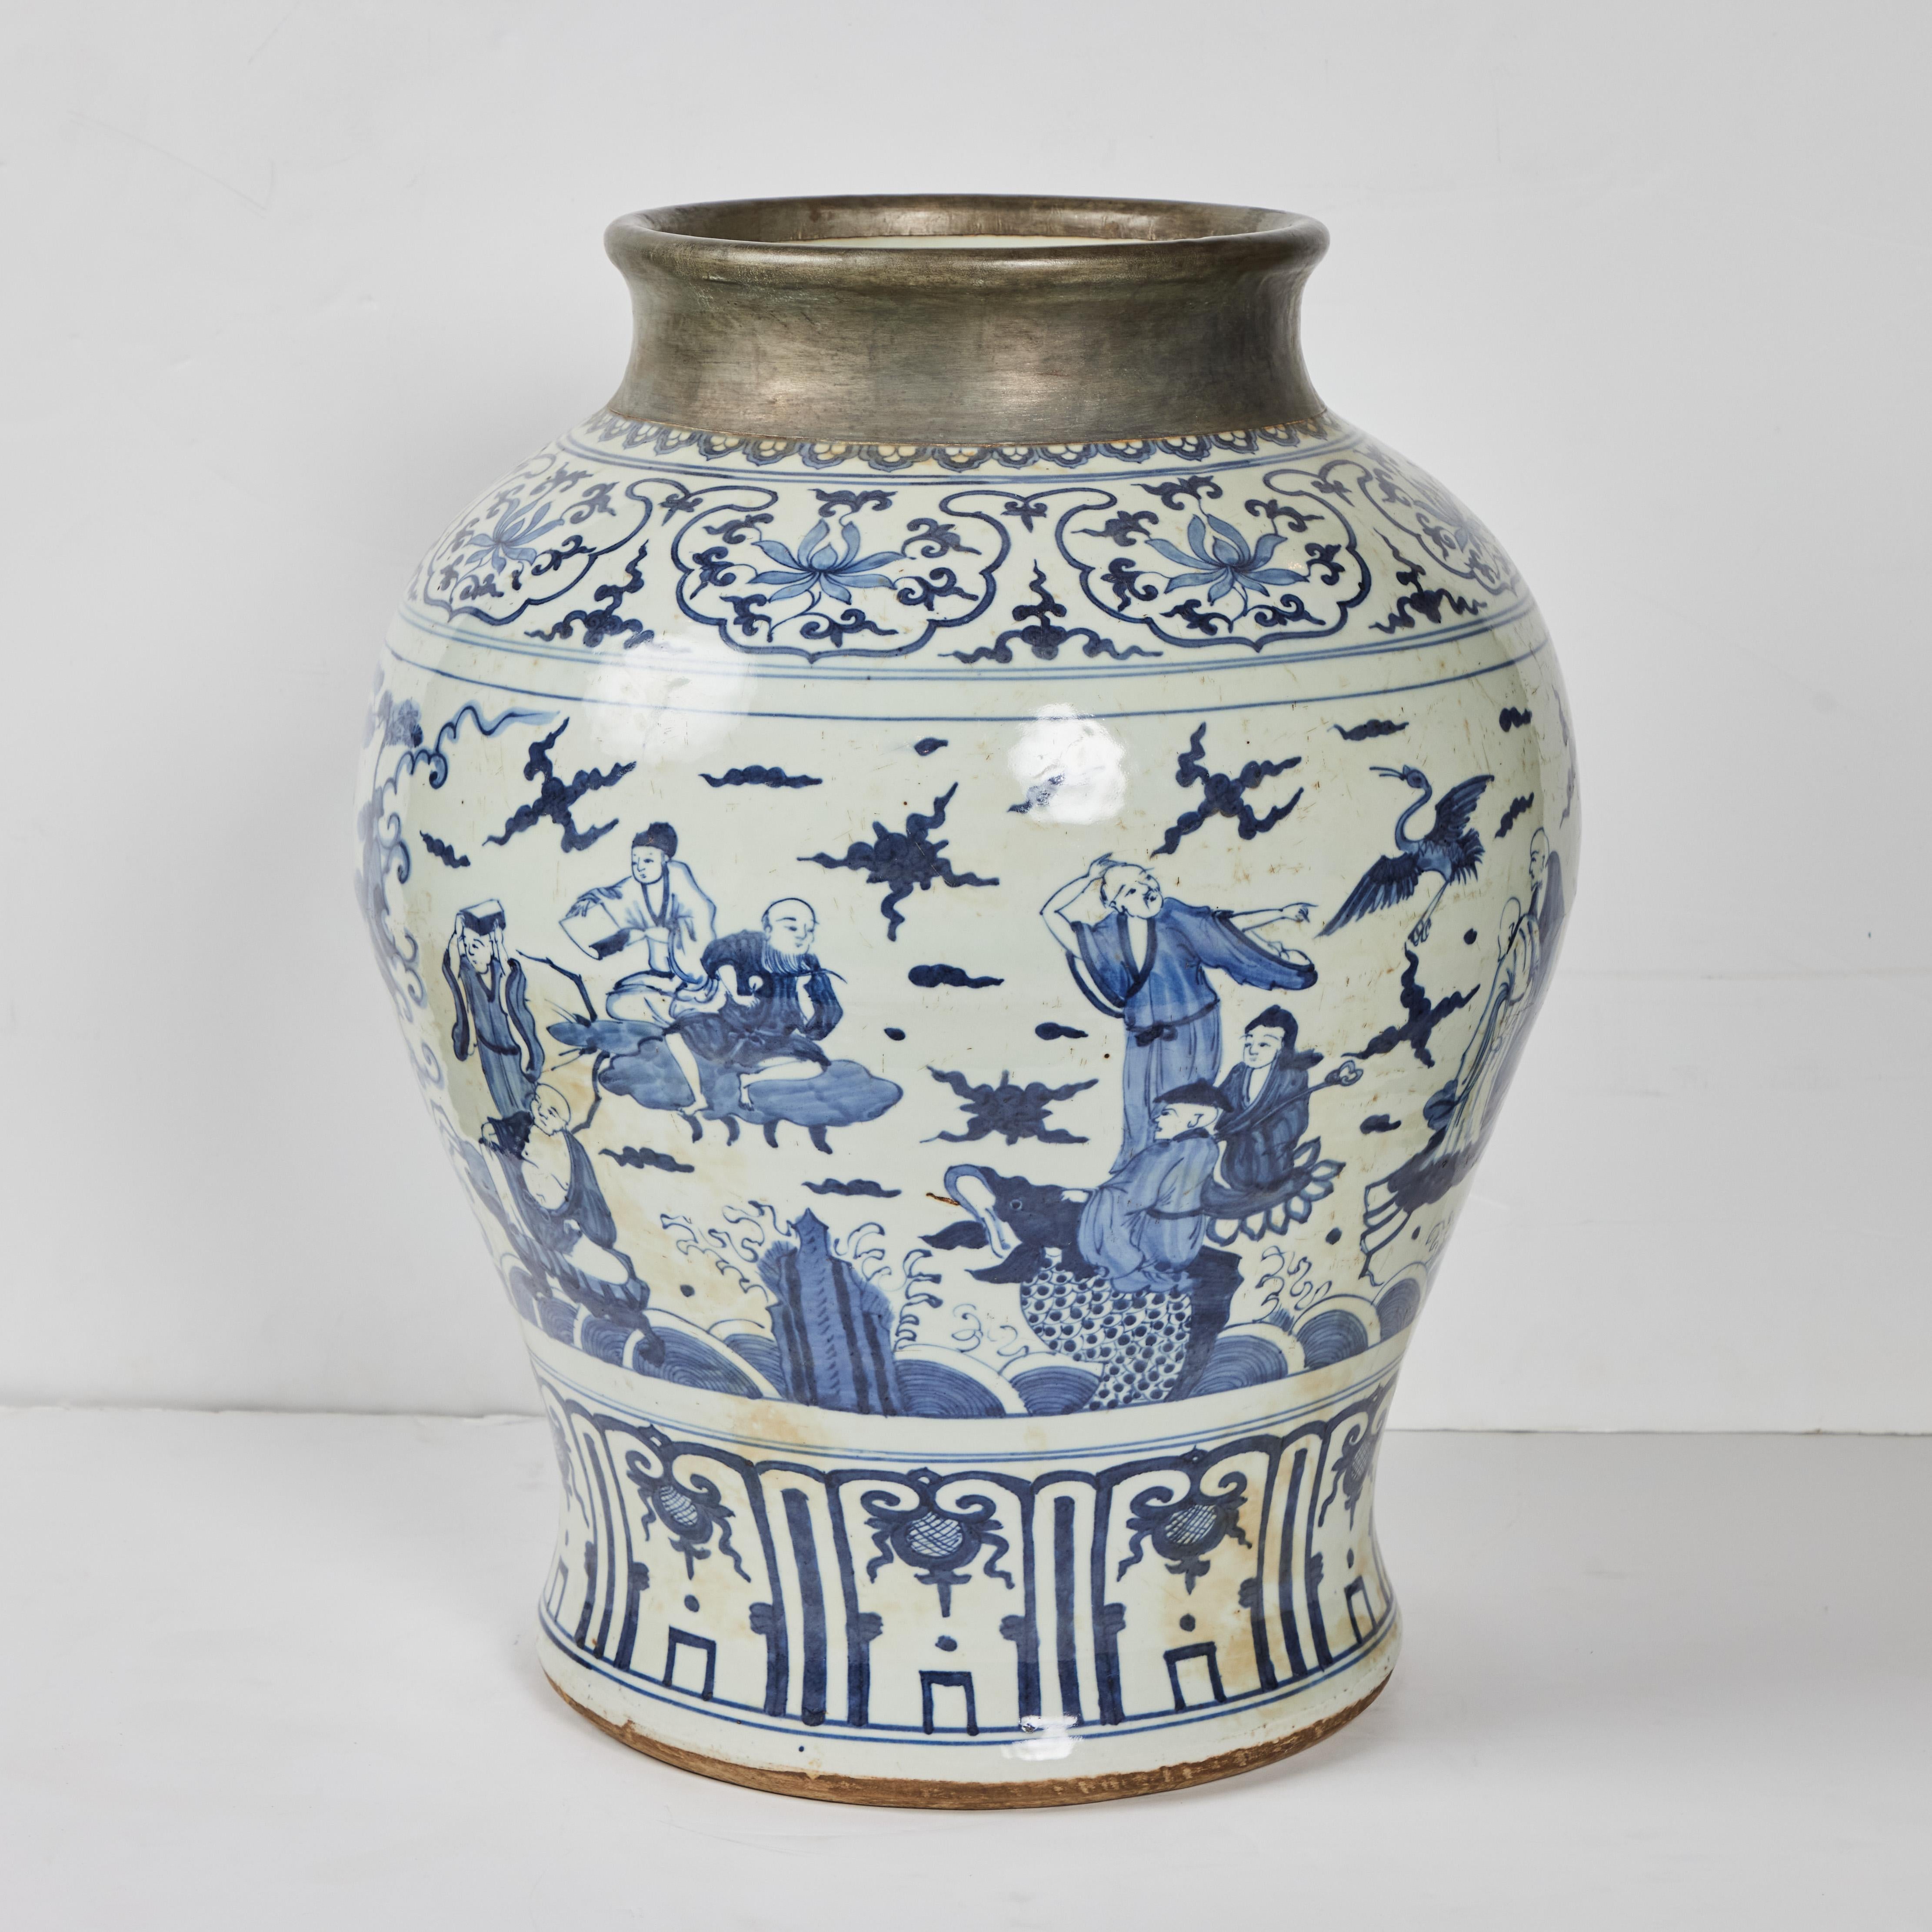 Yuan Dynasty- style jar with pewter rim (as used in Spice Road), featuring hand-painted scenes of figures in a garden.  Republic period.